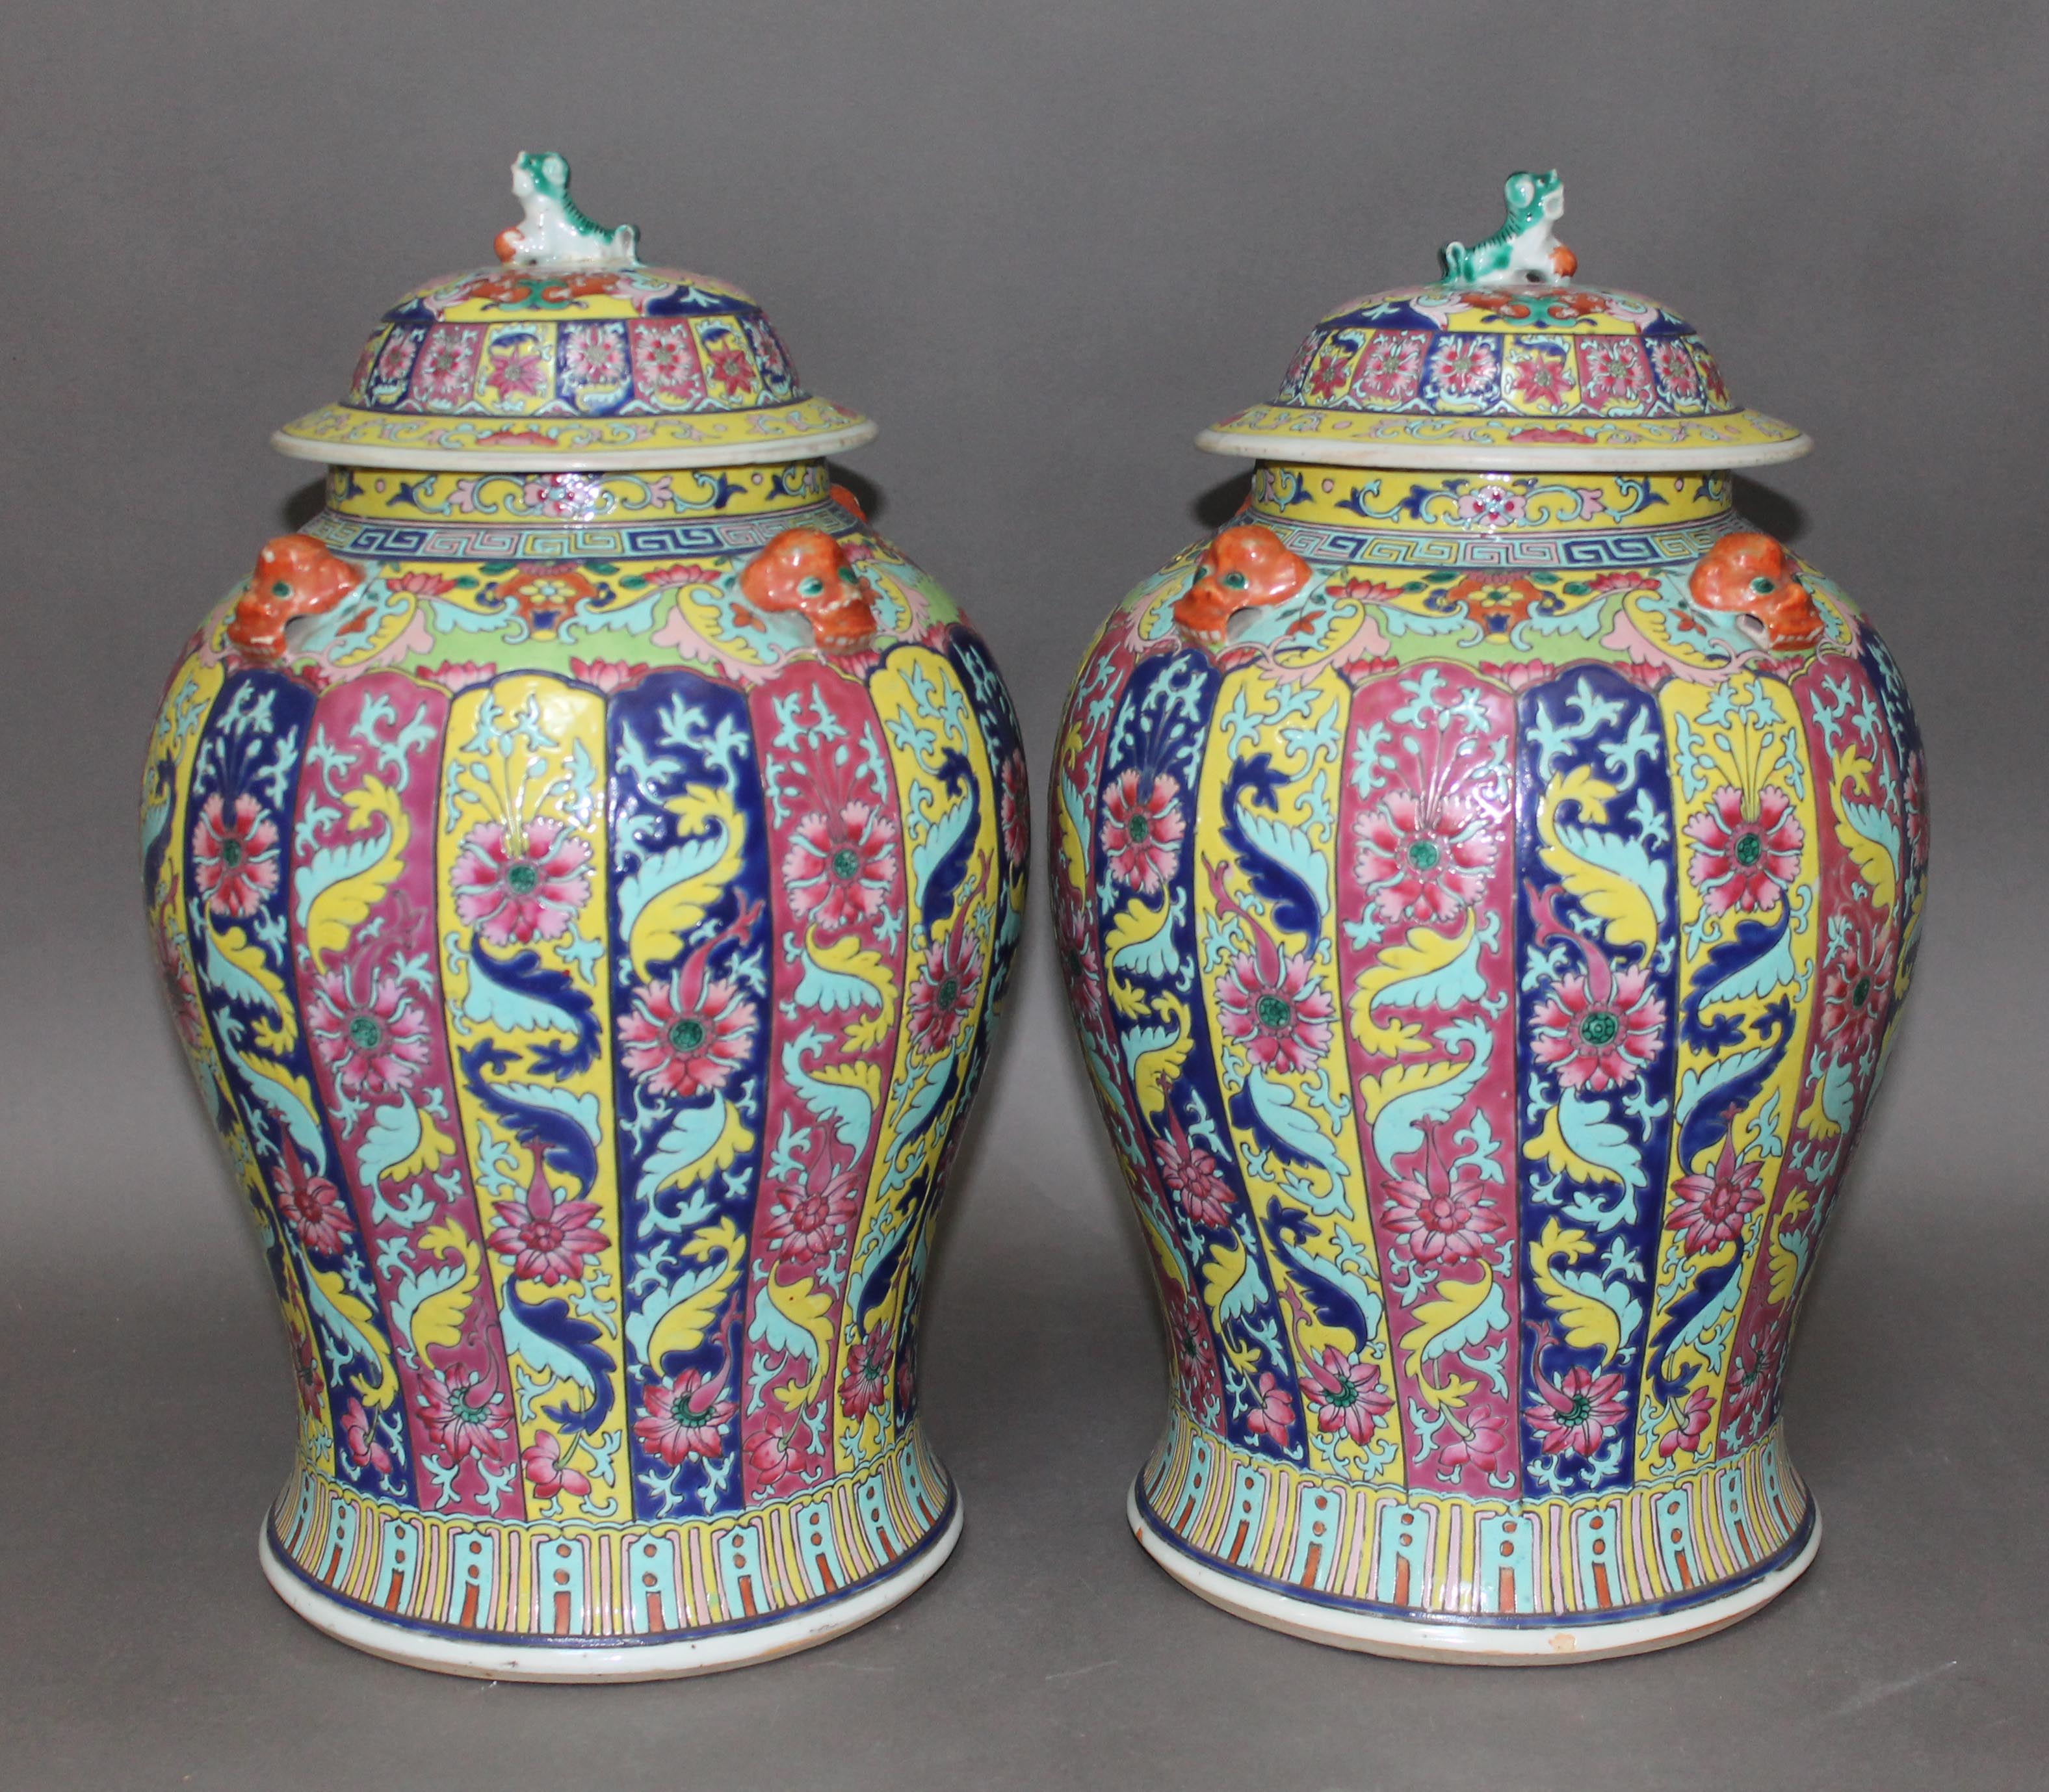 A pair of Chinese Famille Rose porcelain vases, mid 19th century, of baluster form, covers with lion